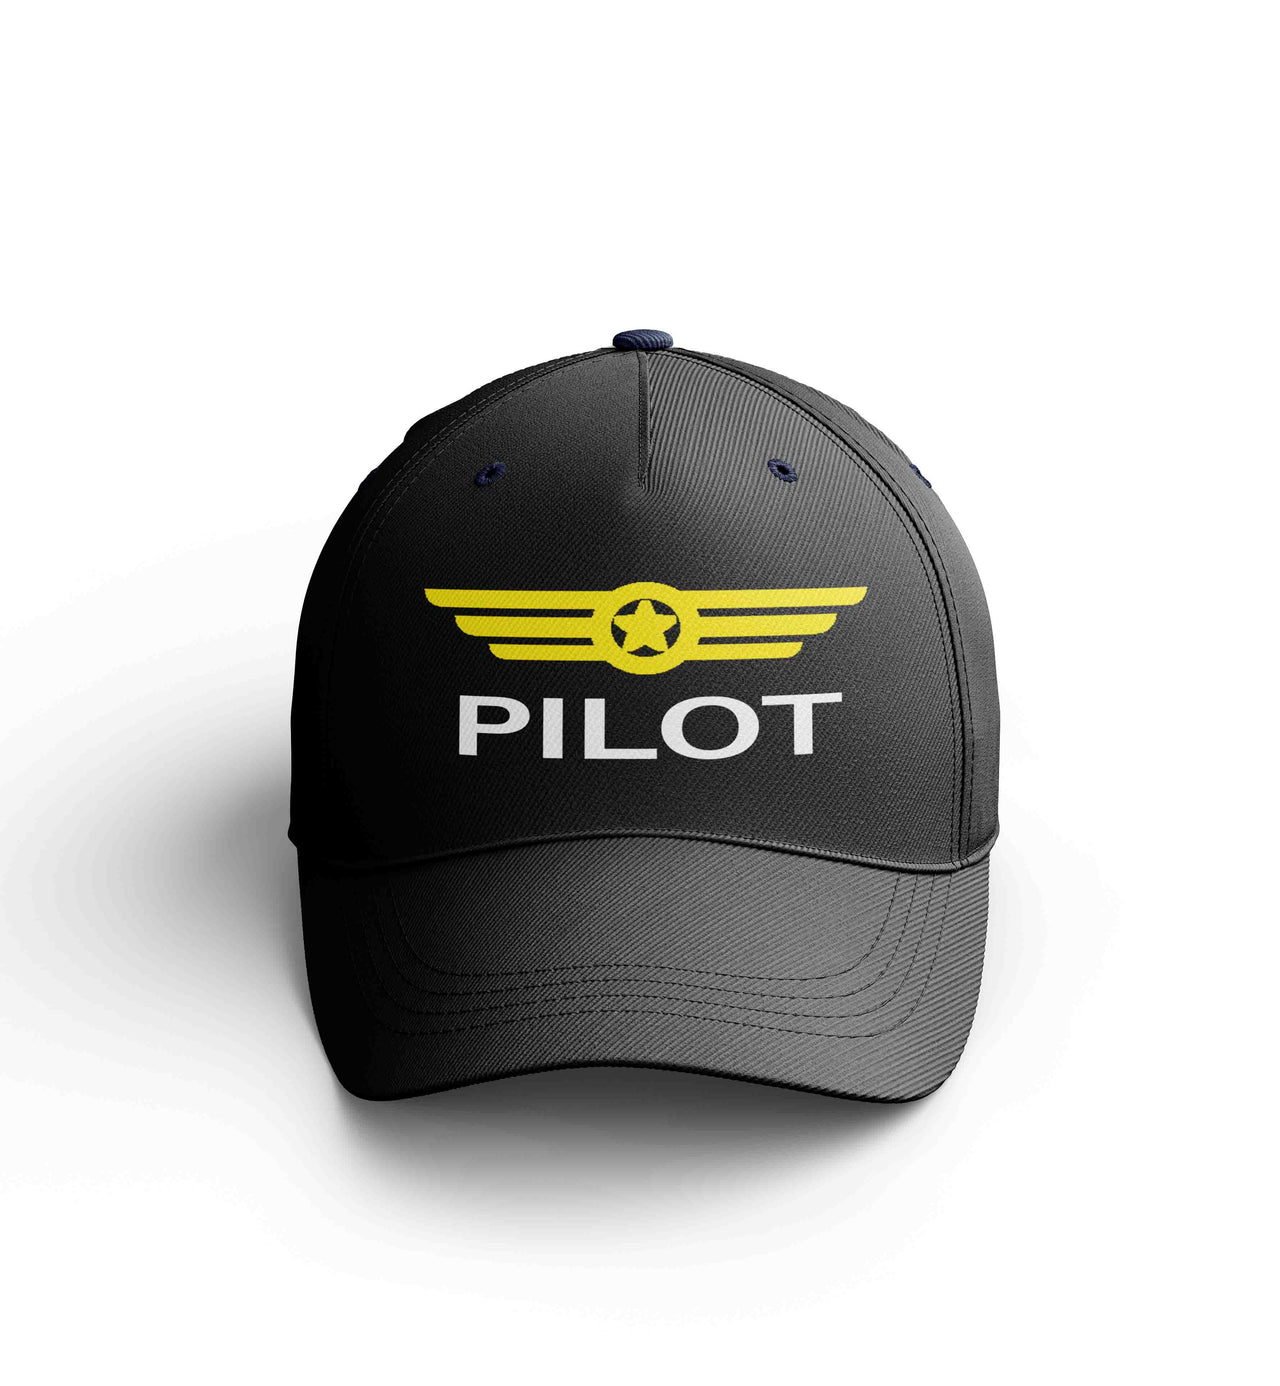 Customizable Name & Pilot Badge Embroidered Hats